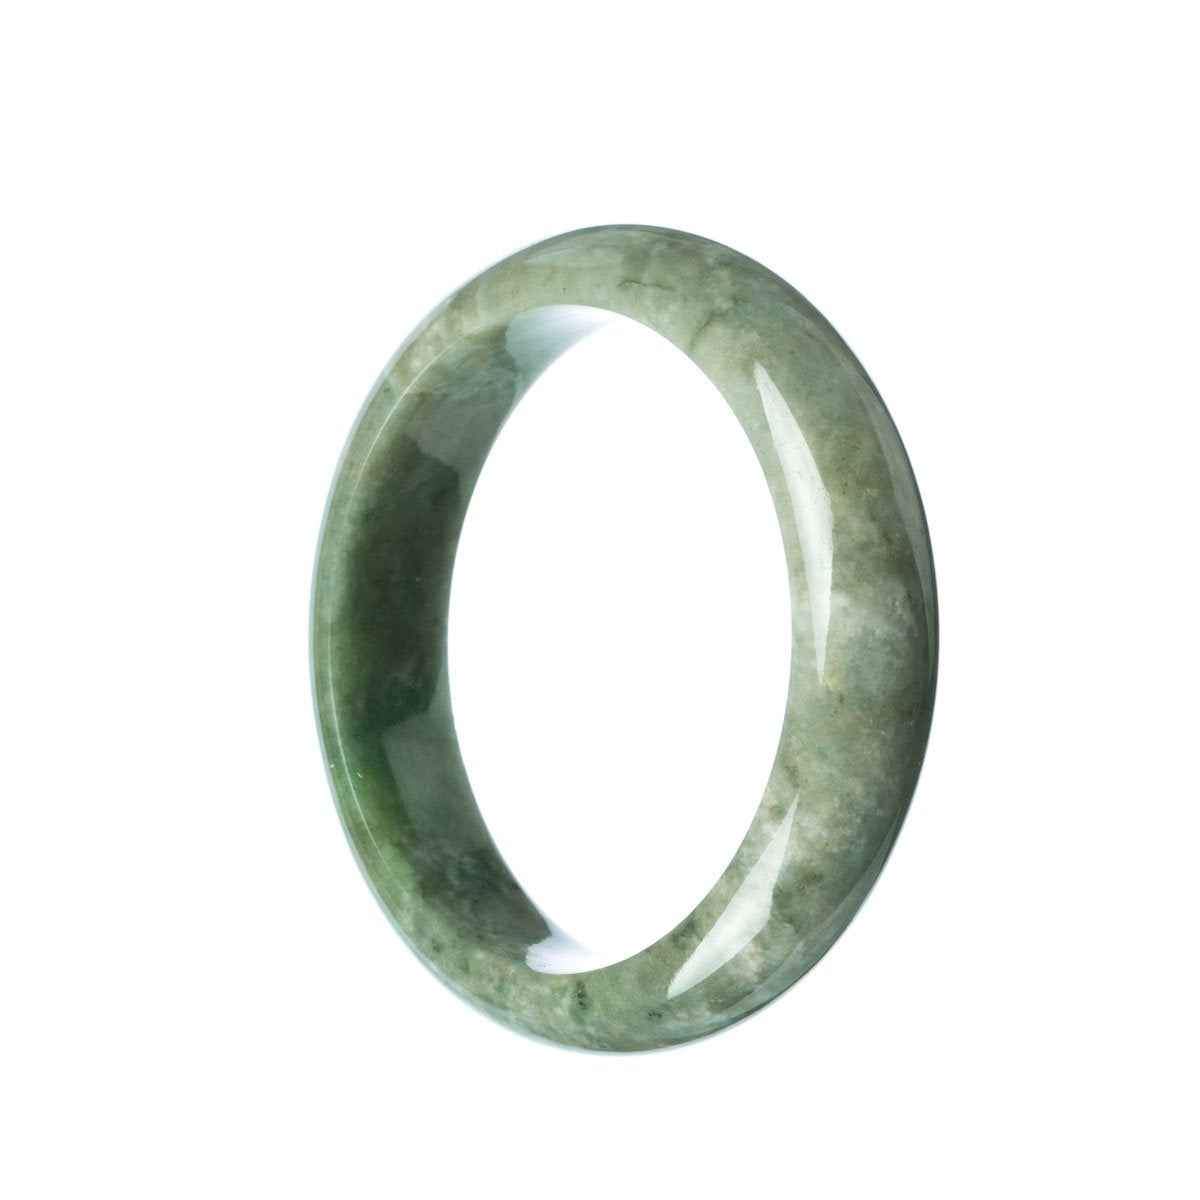 A close-up of a beautiful, half-moon-shaped green jadeite bangle, measuring 58mm in diameter. The bangle is made of high-quality, Grade A green jadeite and has a smooth, polished surface. It's a stunning piece of jewelry, perfect for adding a touch of elegance to any outfit.